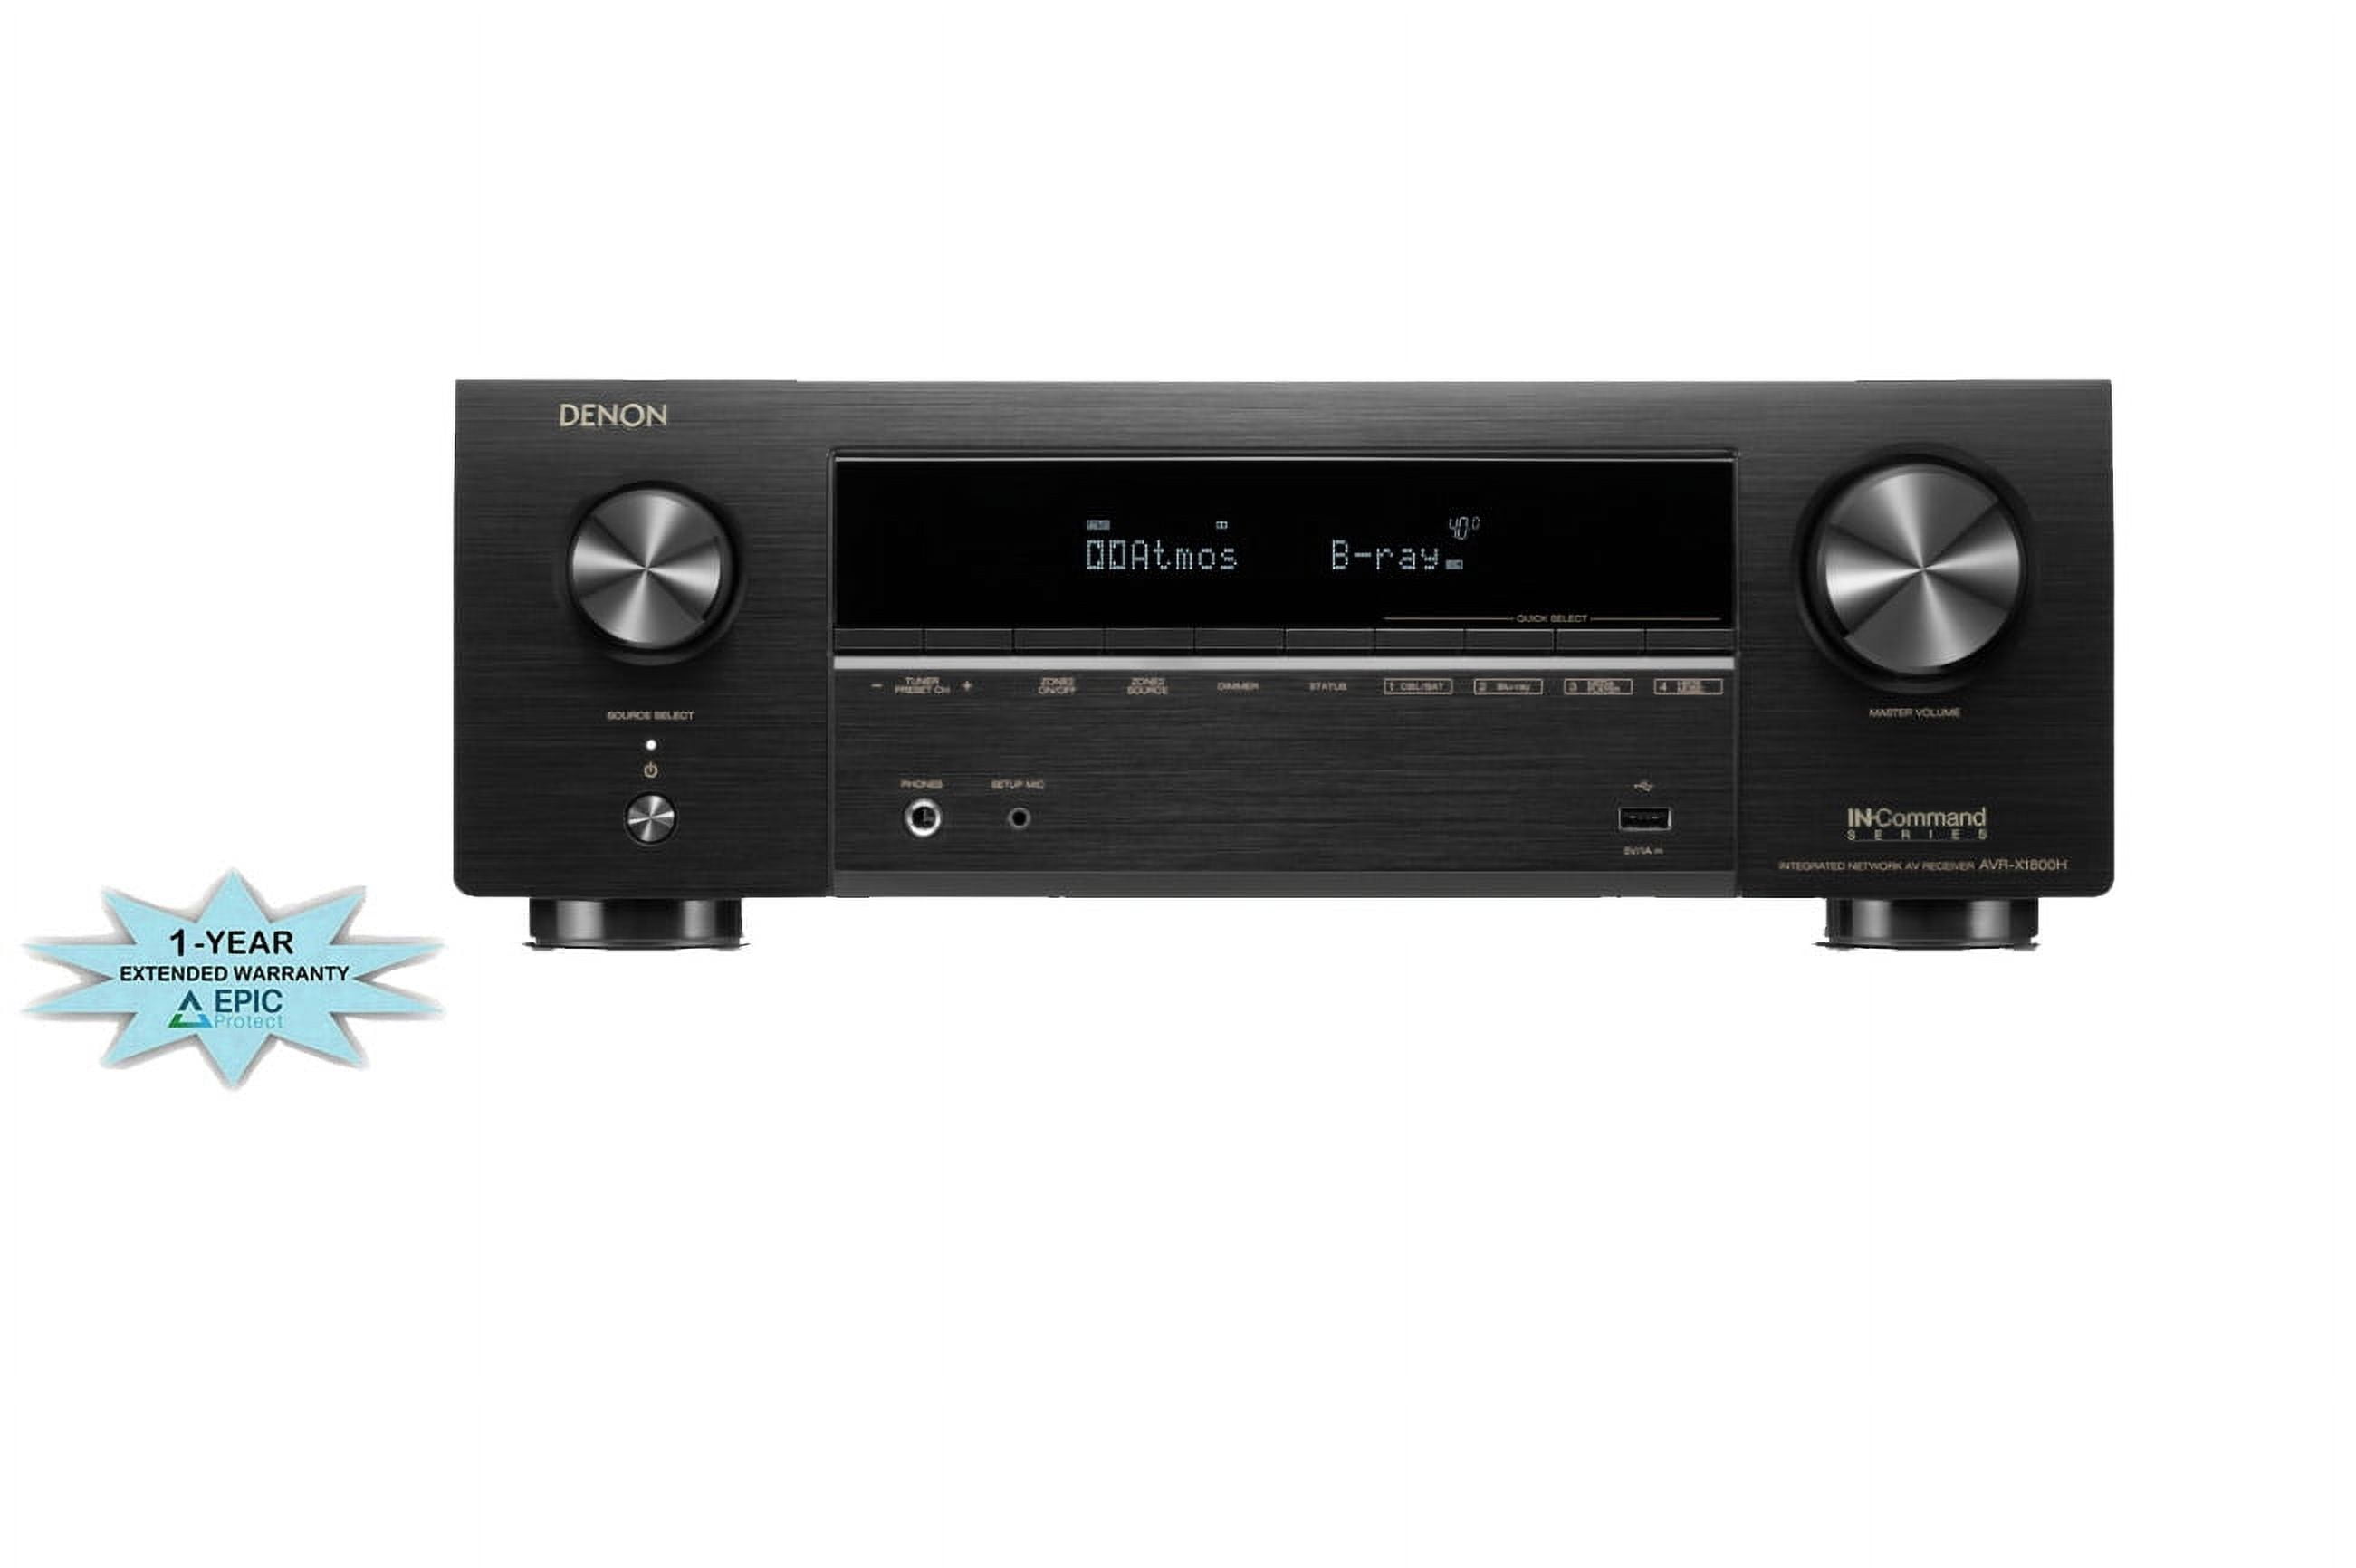 Denon DRA-900H 2.1 Channel Receiver with 8K HEOS Stereo AV Built-In